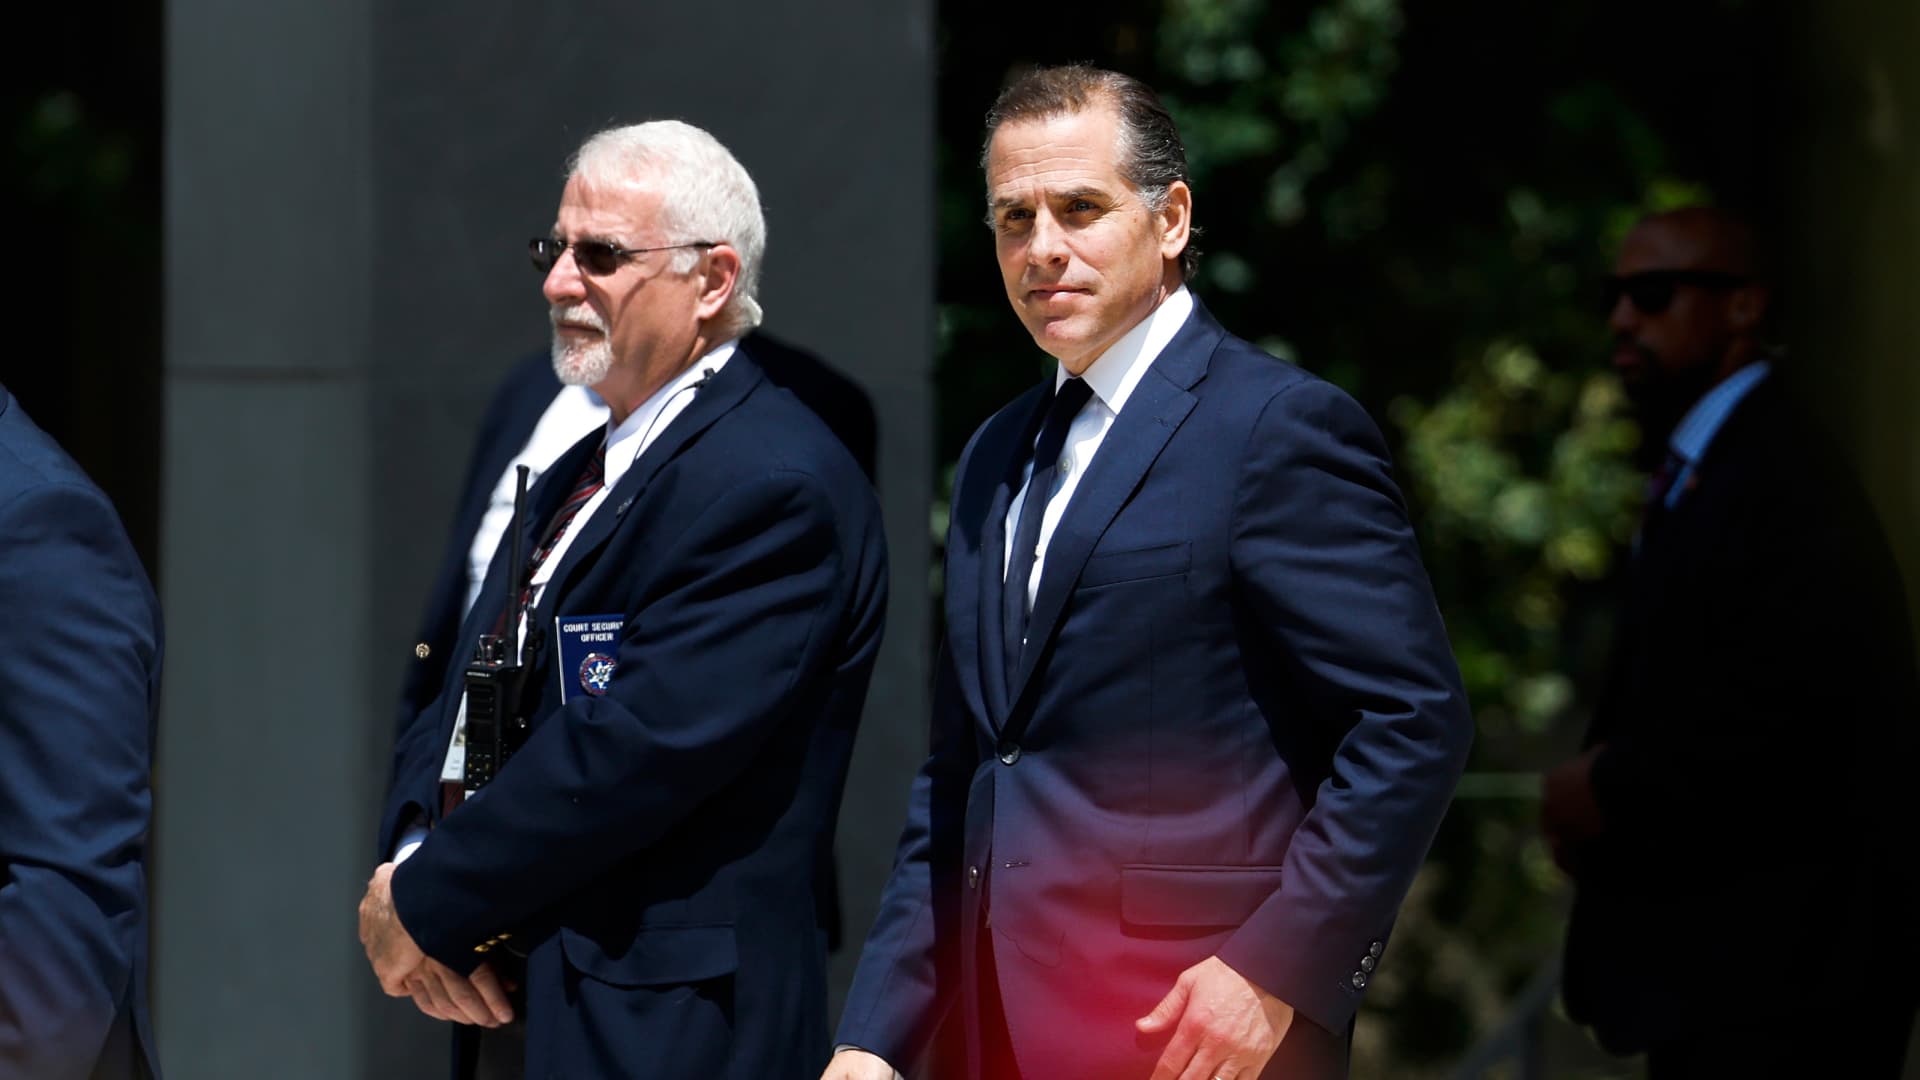 Hunter Biden pleads not guilty to charges after judge questions revised plea deal